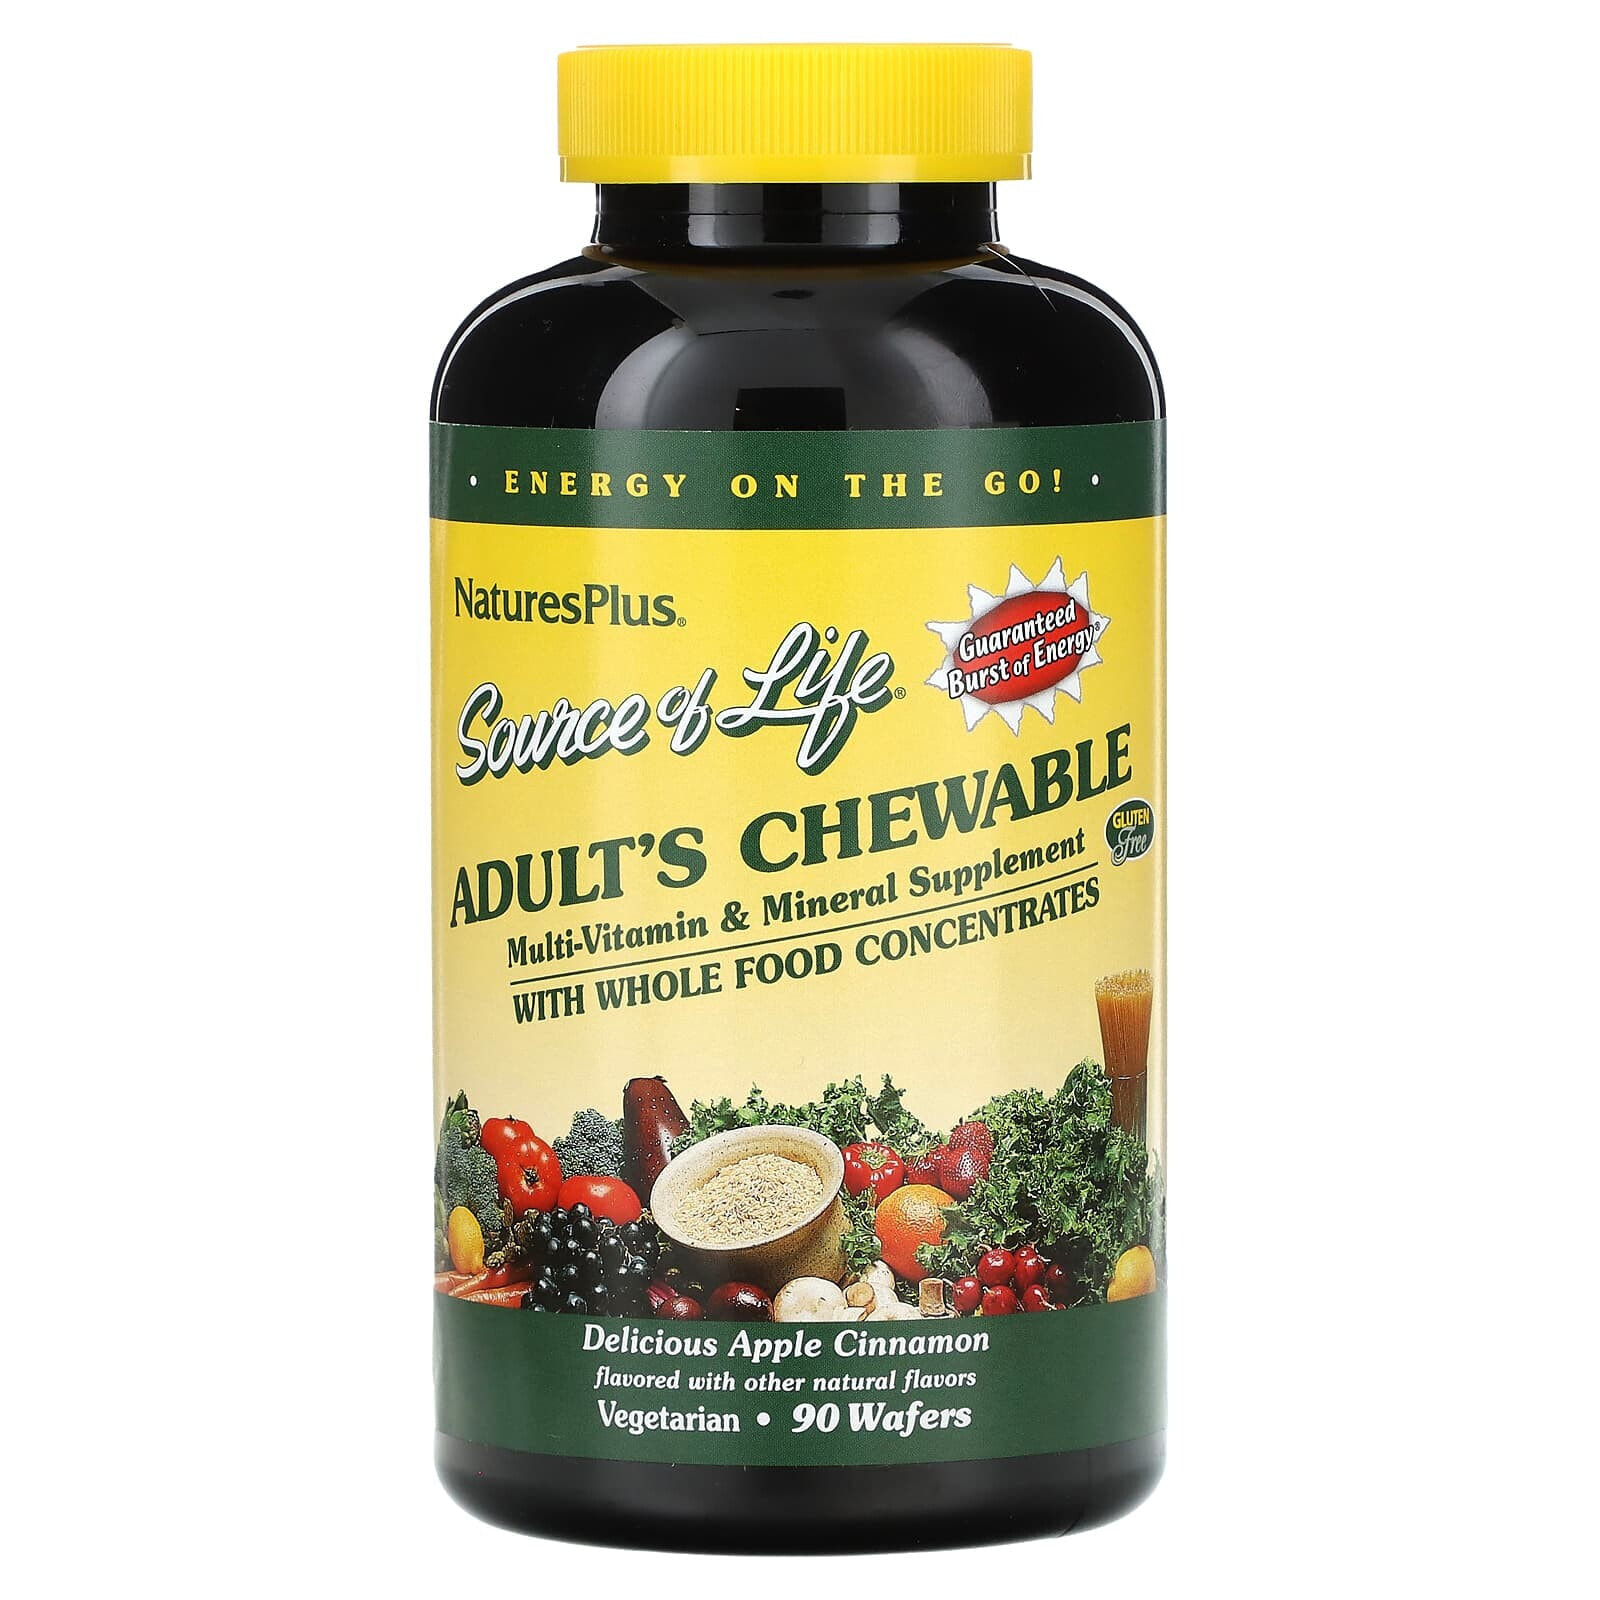 Source of Life, Adult's Chewable Multi-Vitamin & Mineral Supplement, Delicious Apple Cinnamon, 90 Wafers